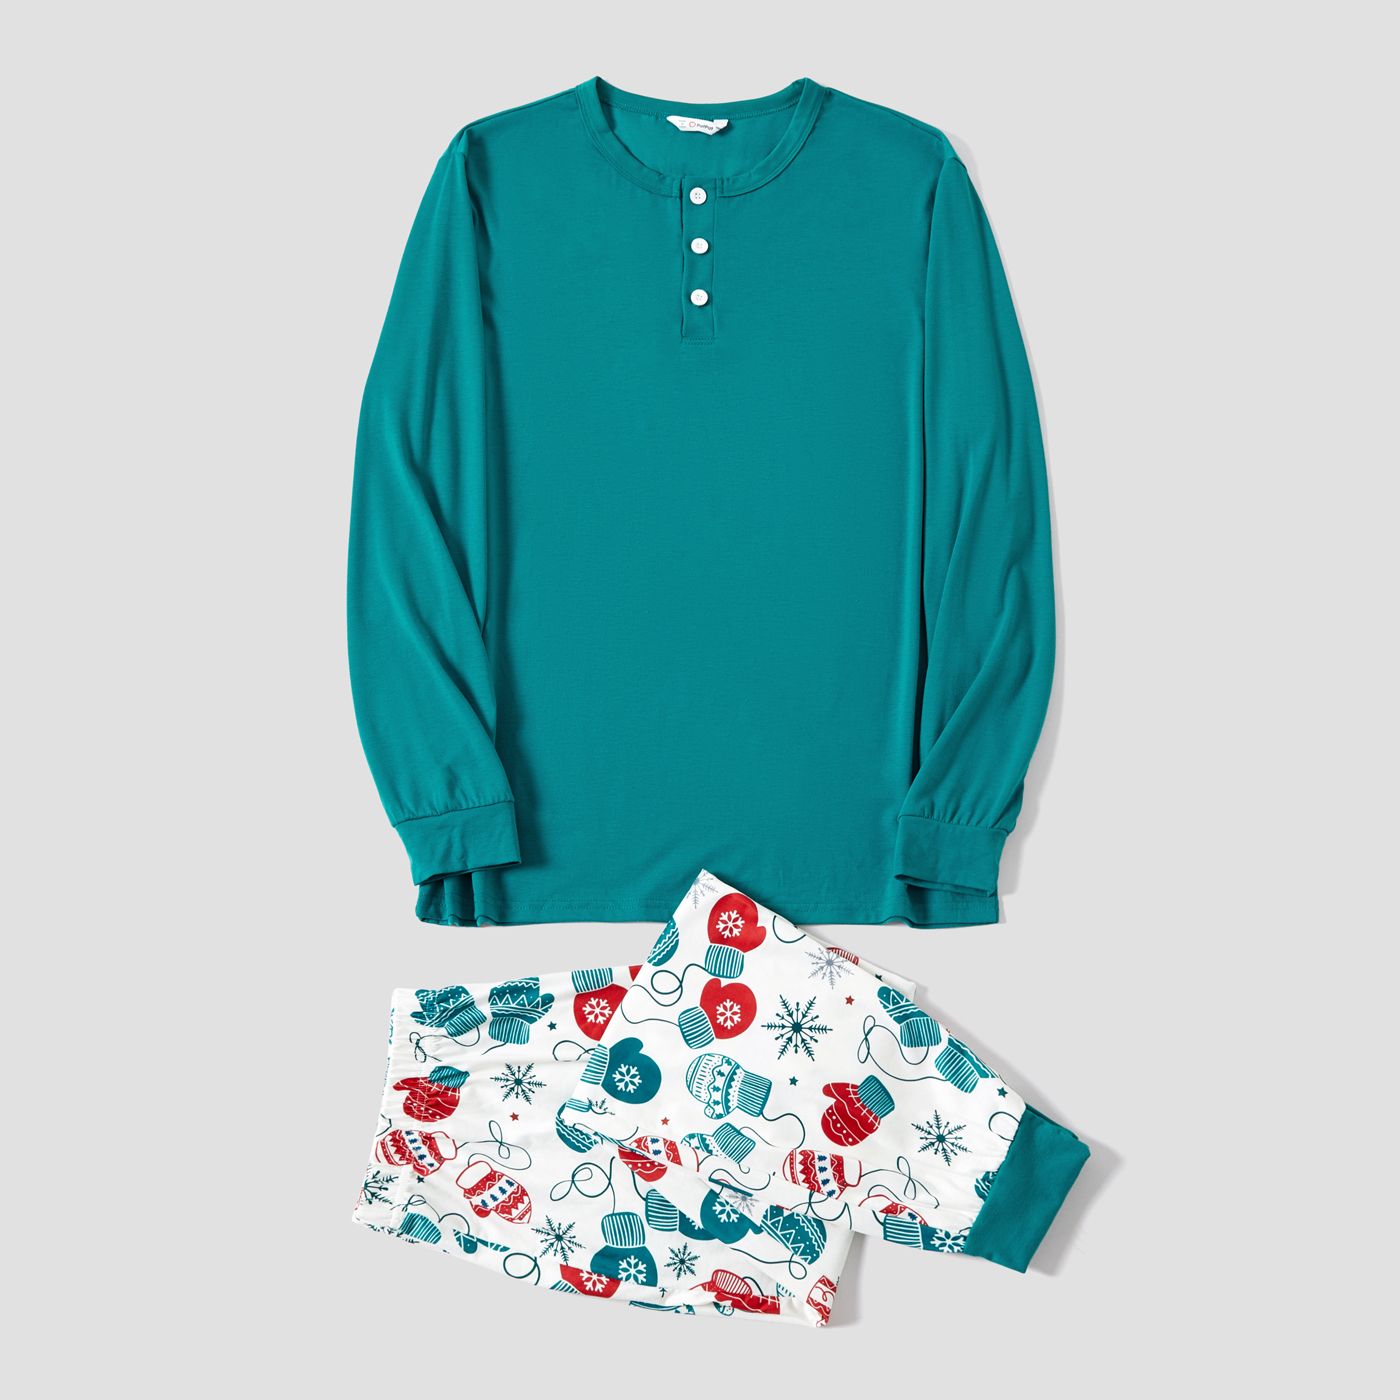 Buy Holiday Pajama Party Clothes Online for Sale - PatPat US Mobile